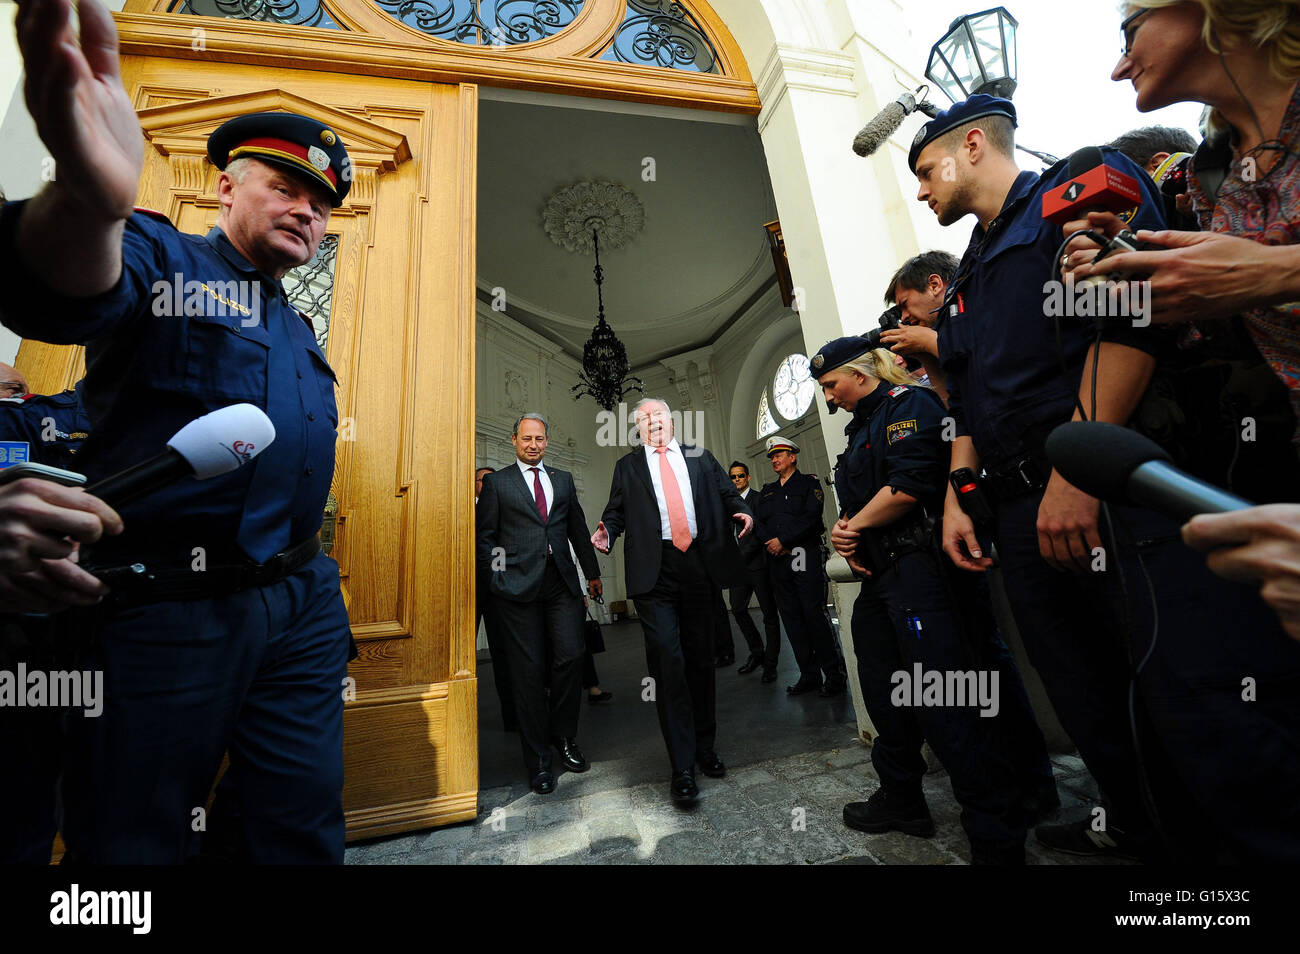 Vienna, Austria. 9th May, 2016. Vienna Mayor Michael Haeupl (R center) of the Social Democratic Party leaves the presidential office after a visit at the Austrian President Heinz Fischer in Vienna, Austria, May 9, 2016. Austrian Chancellor Werner Faymann on Monday announced his resignation, the Chancellery confirmed with Xinhua. In a brief statement, Faymann said the support within his Social Democratic Party (SPO) for him is insufficient and he resigns as SPO chief and the Austrian Chancellor. © Qian Yi/Xinhua/Alamy Live News Stock Photo